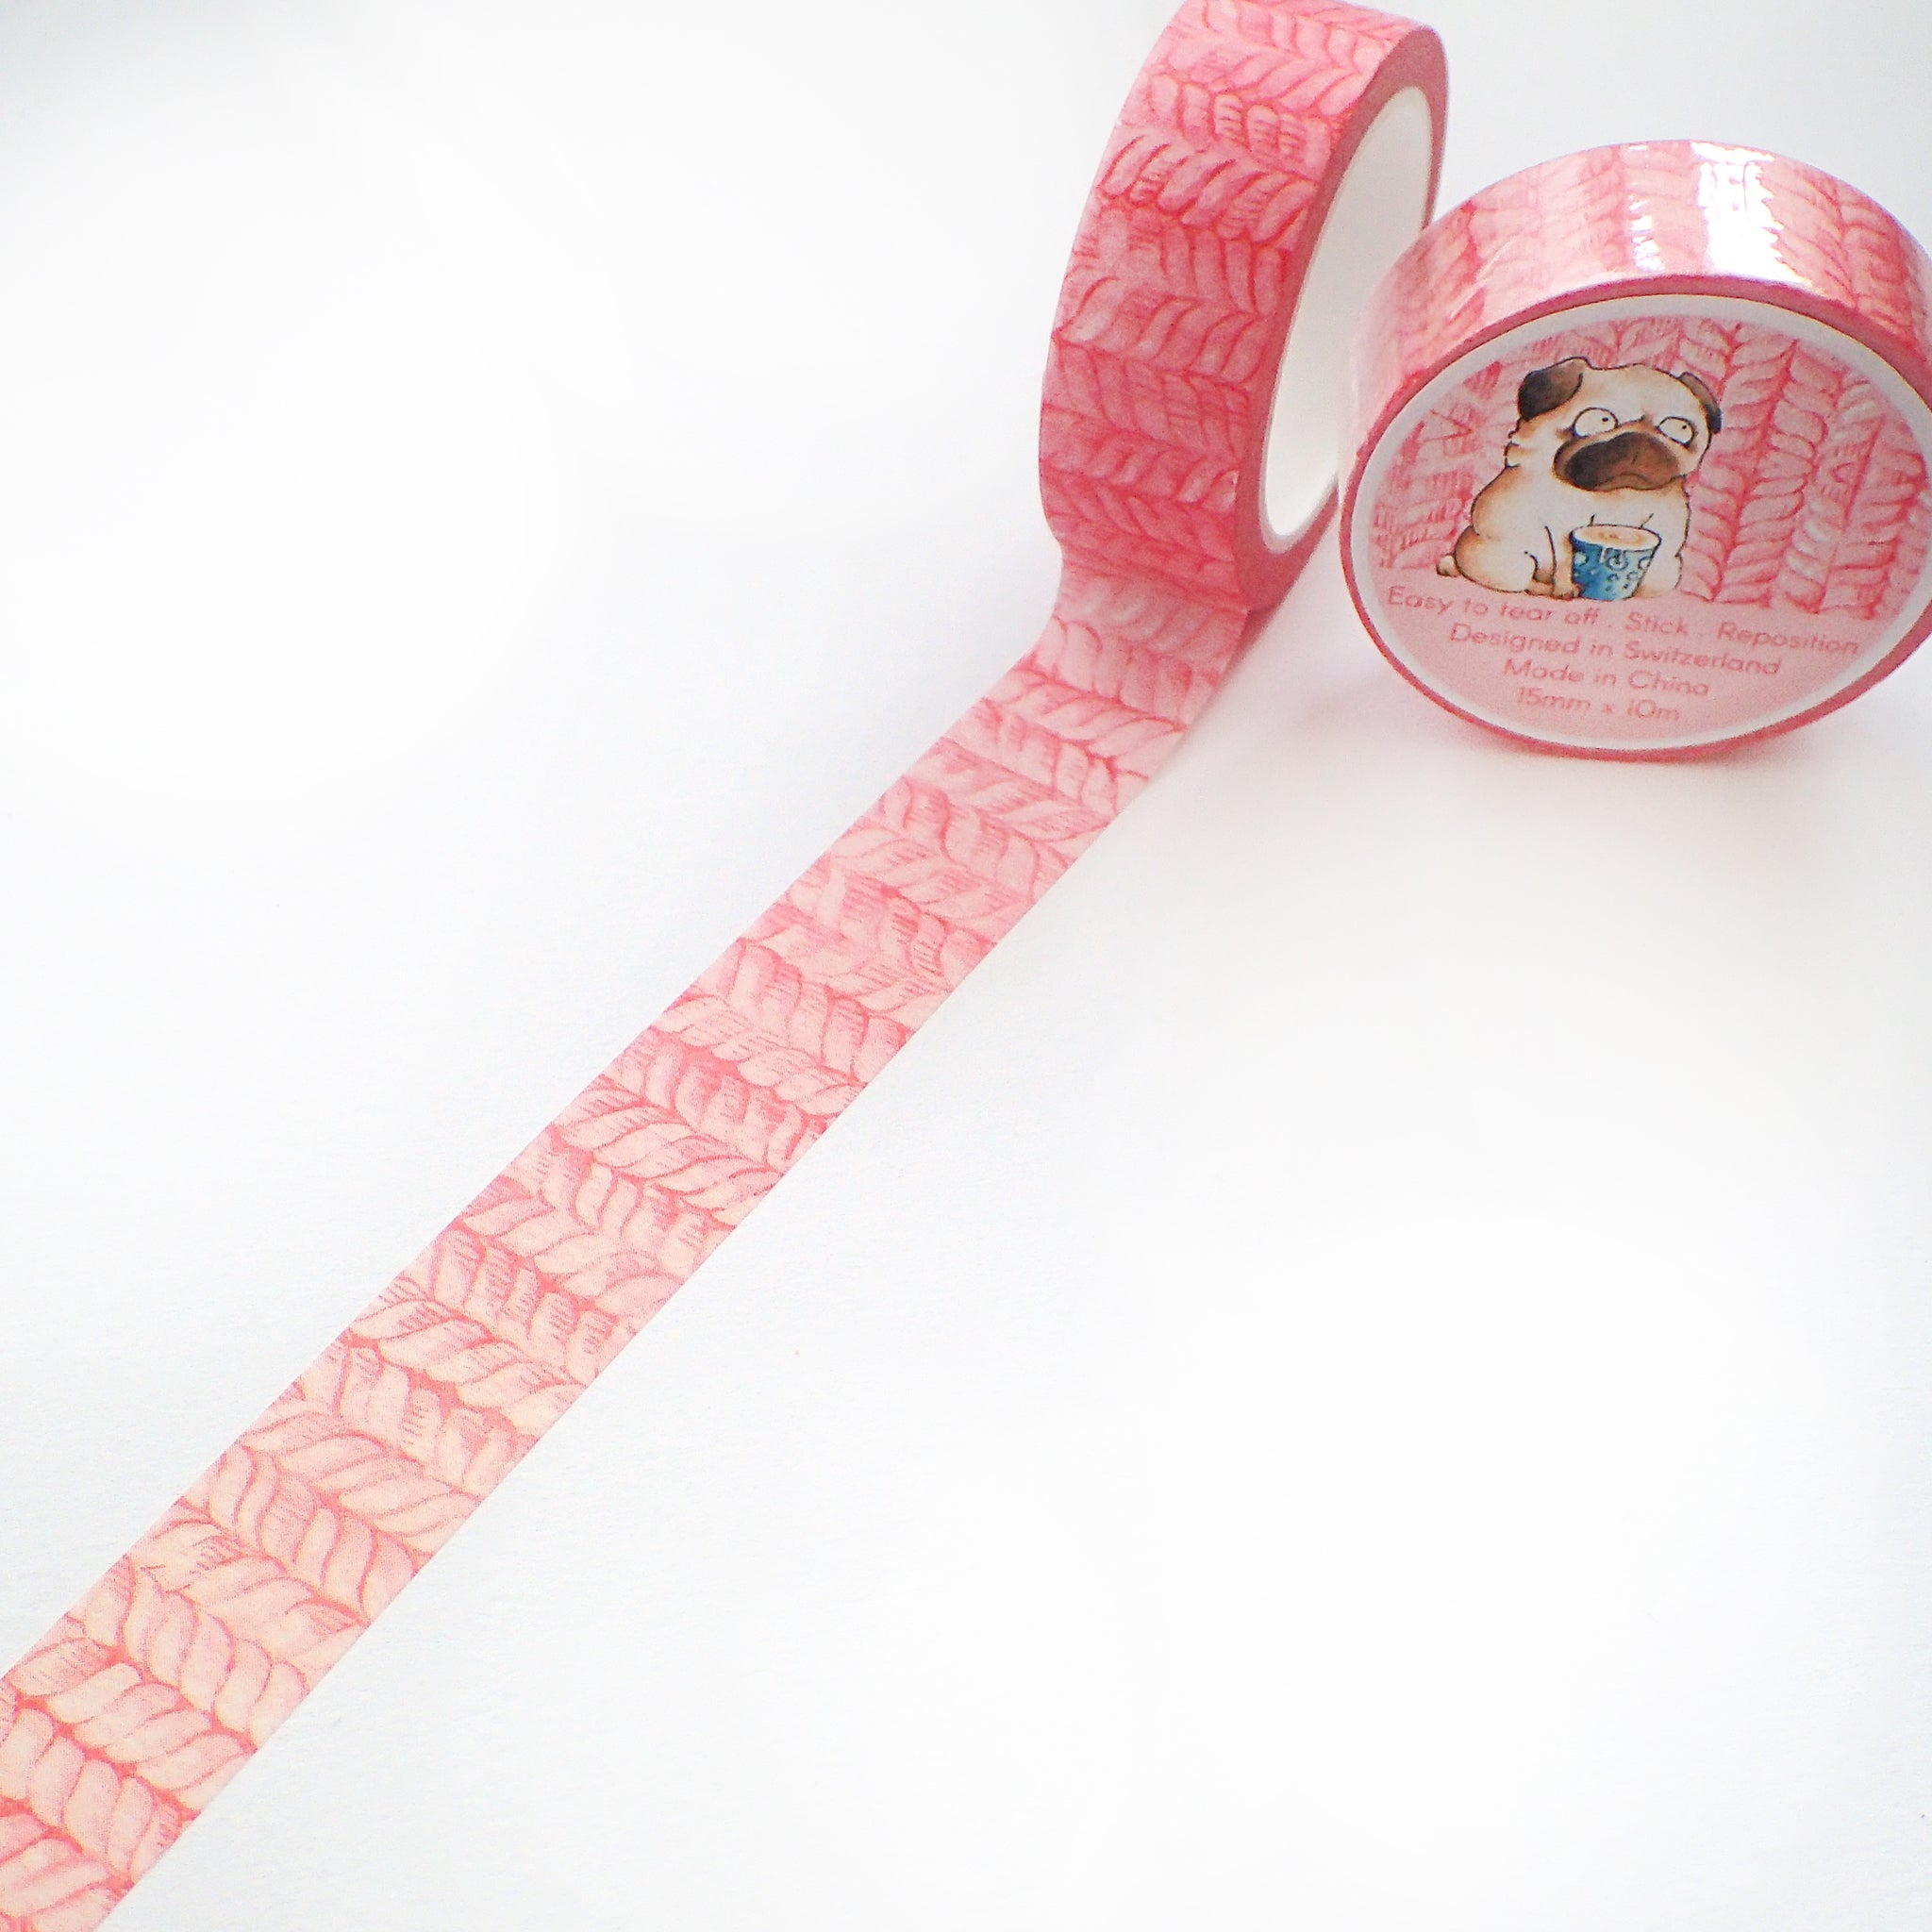 A Pug&#39;s Life - 15mm Washi Tape - Pink Scarf